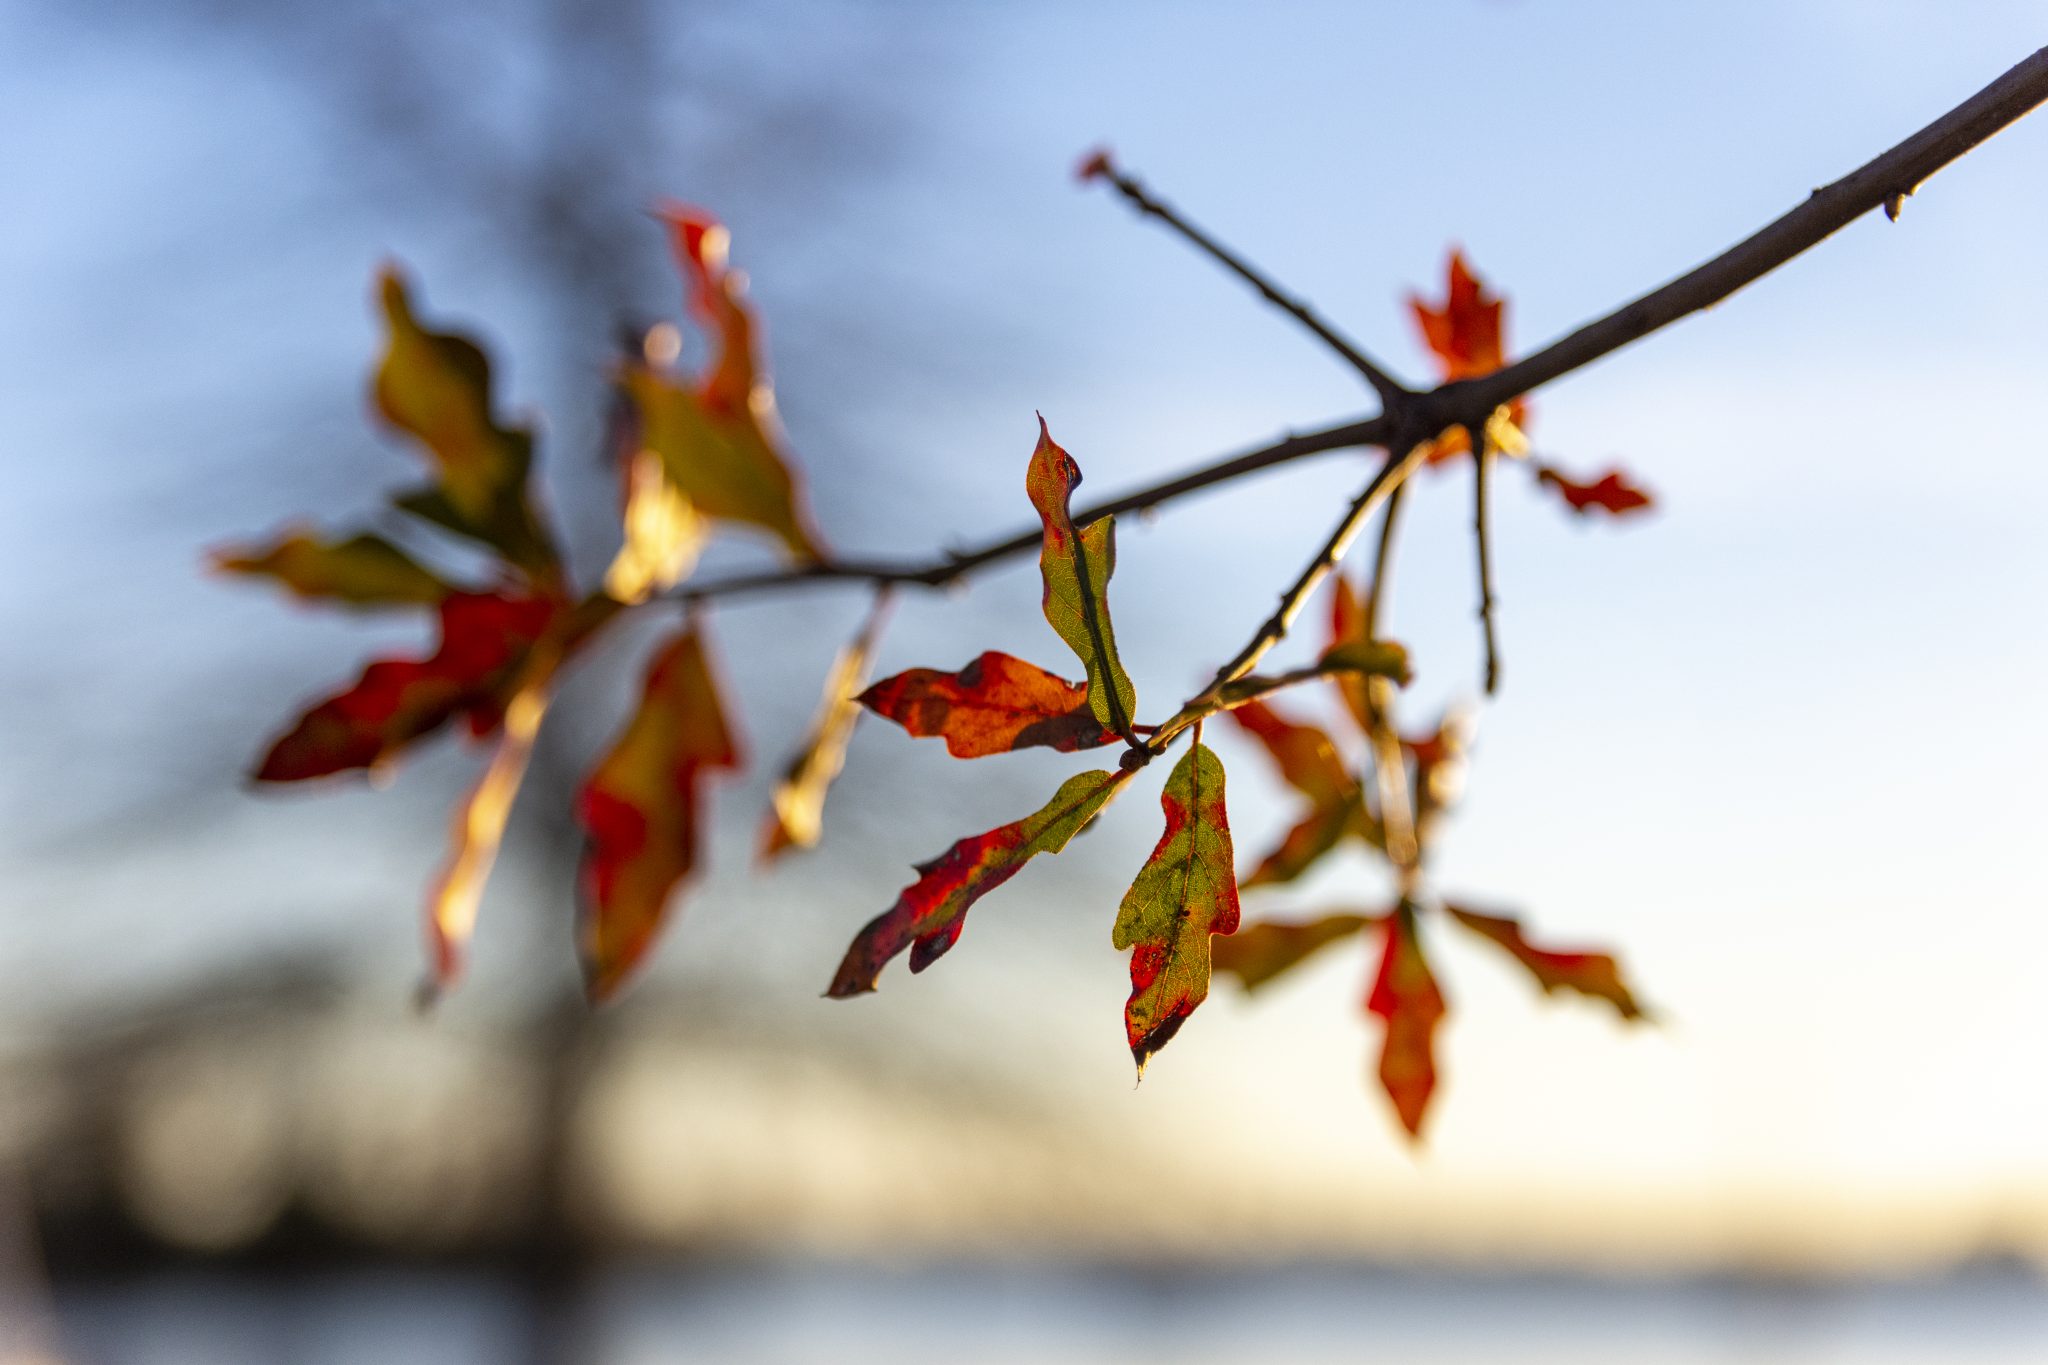 Autumn leaves on a small twig